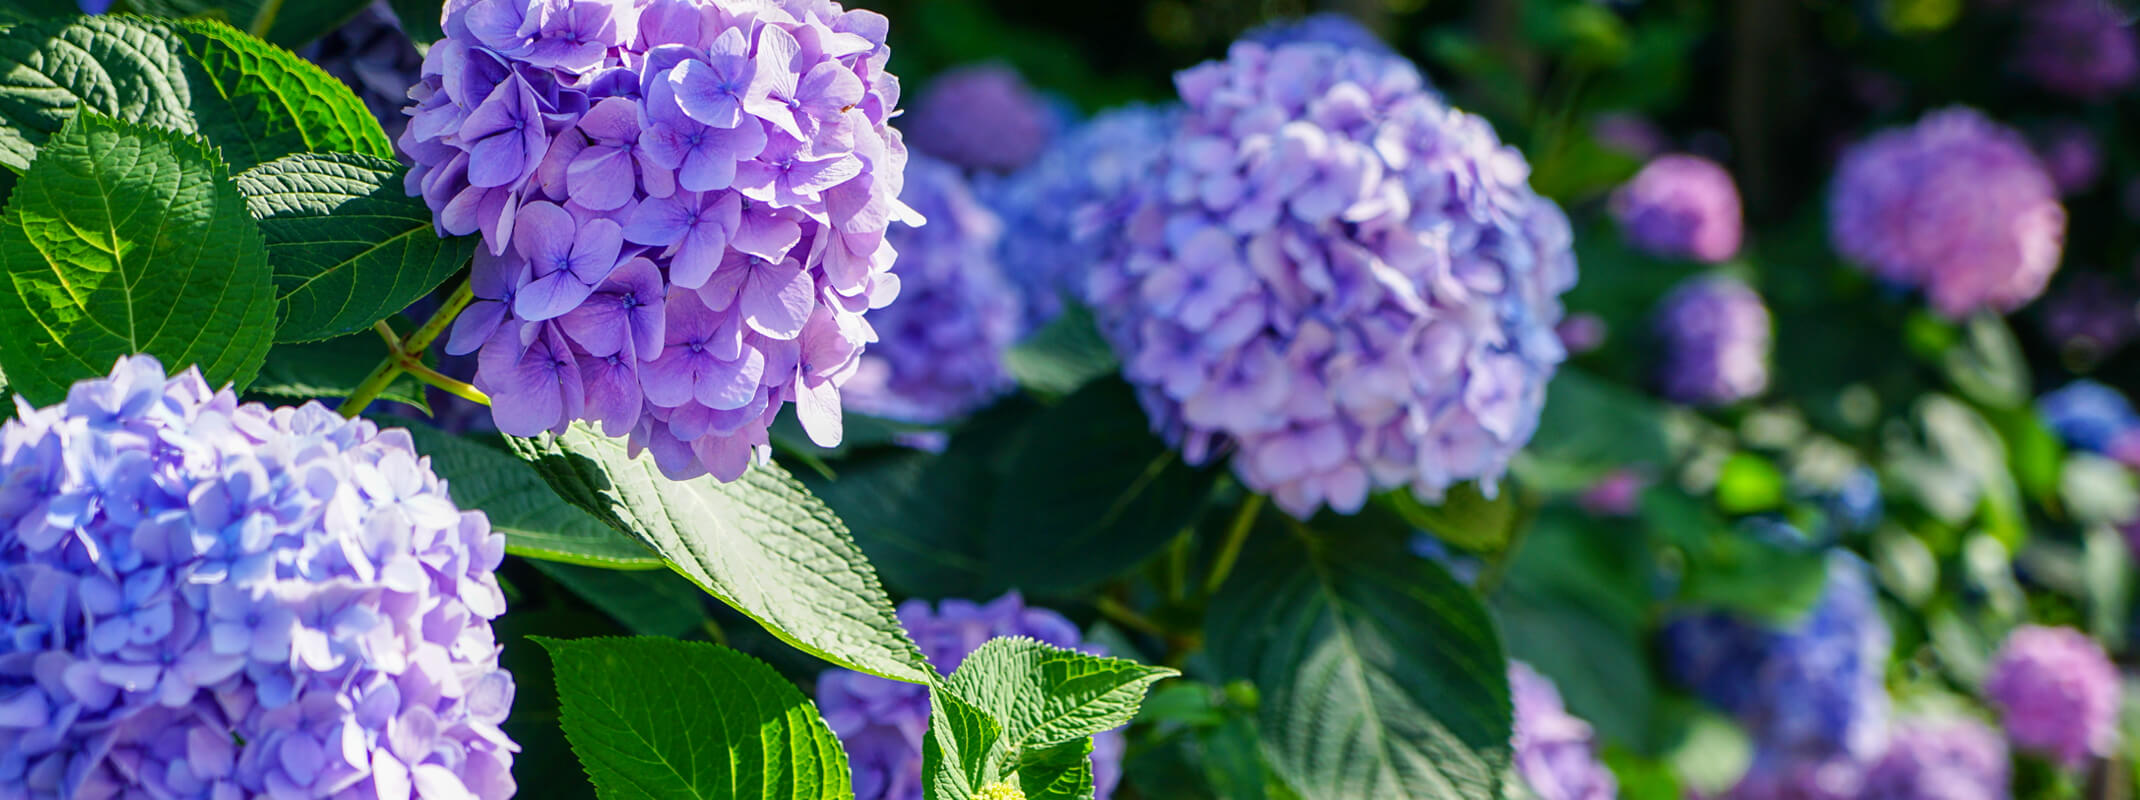 Blooming blue and purple pink hydrangea shrubs